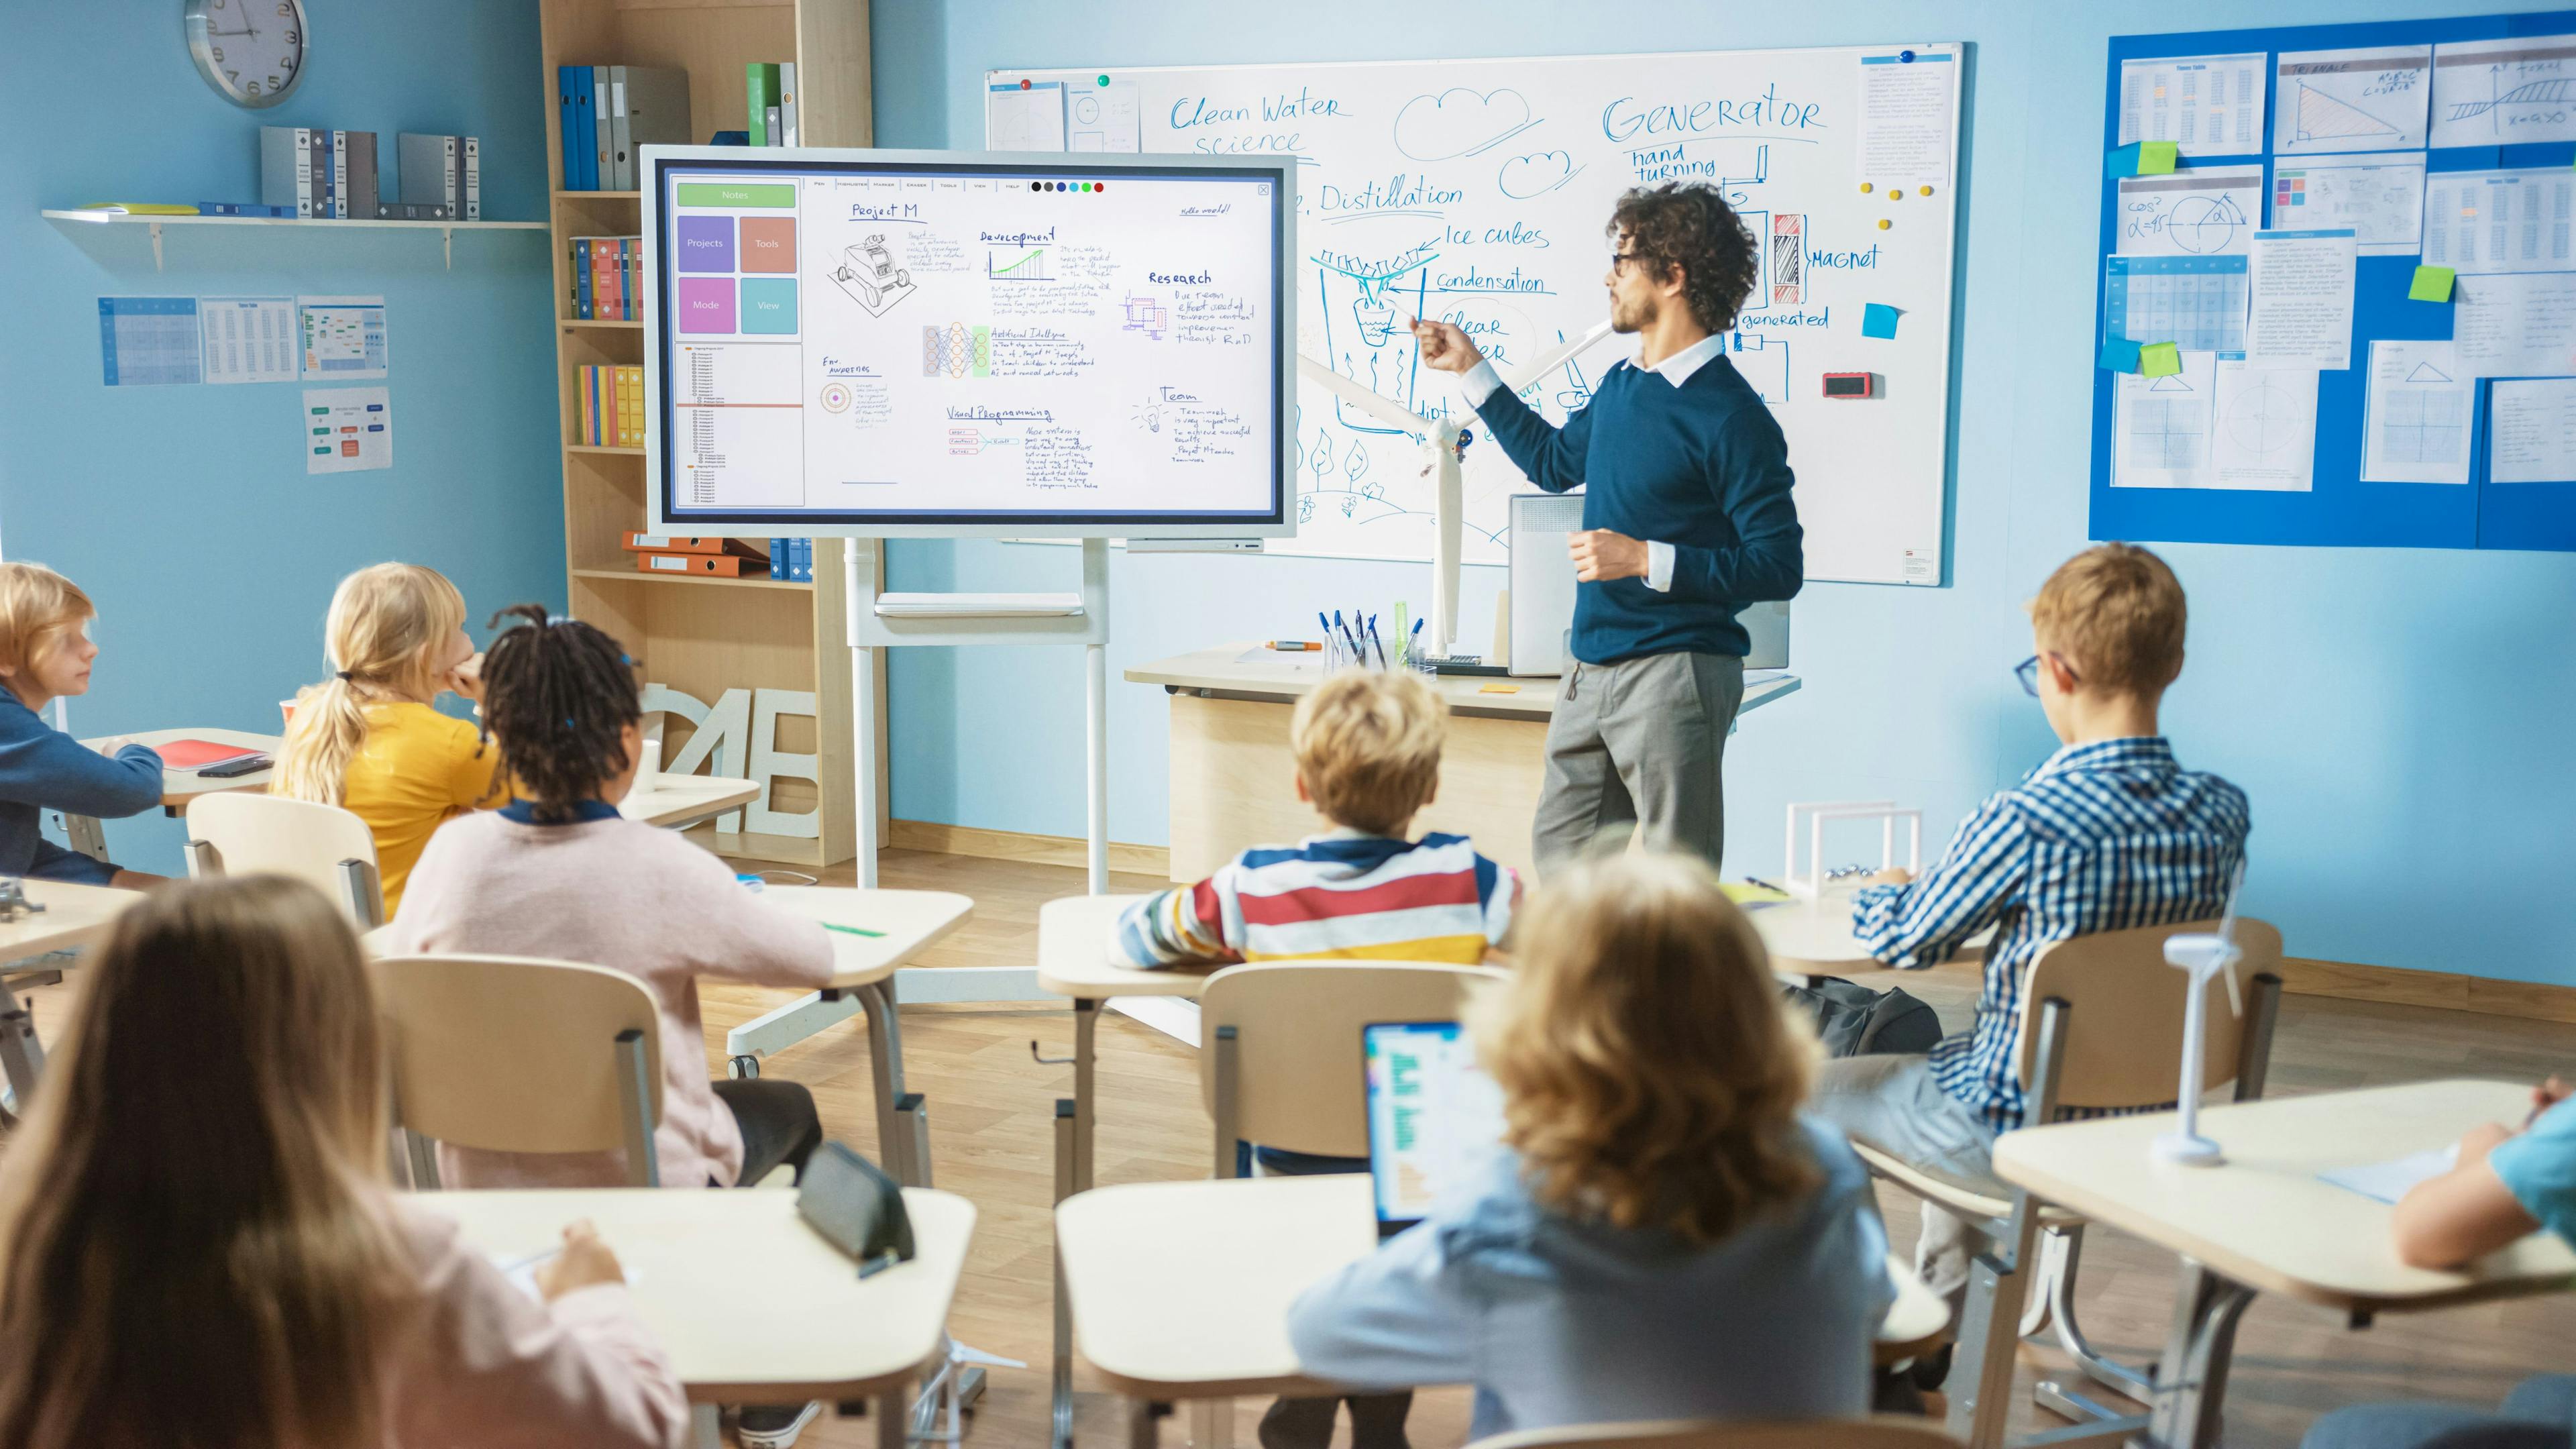 How to Avoid Disruption When Replacing Classroom Technology